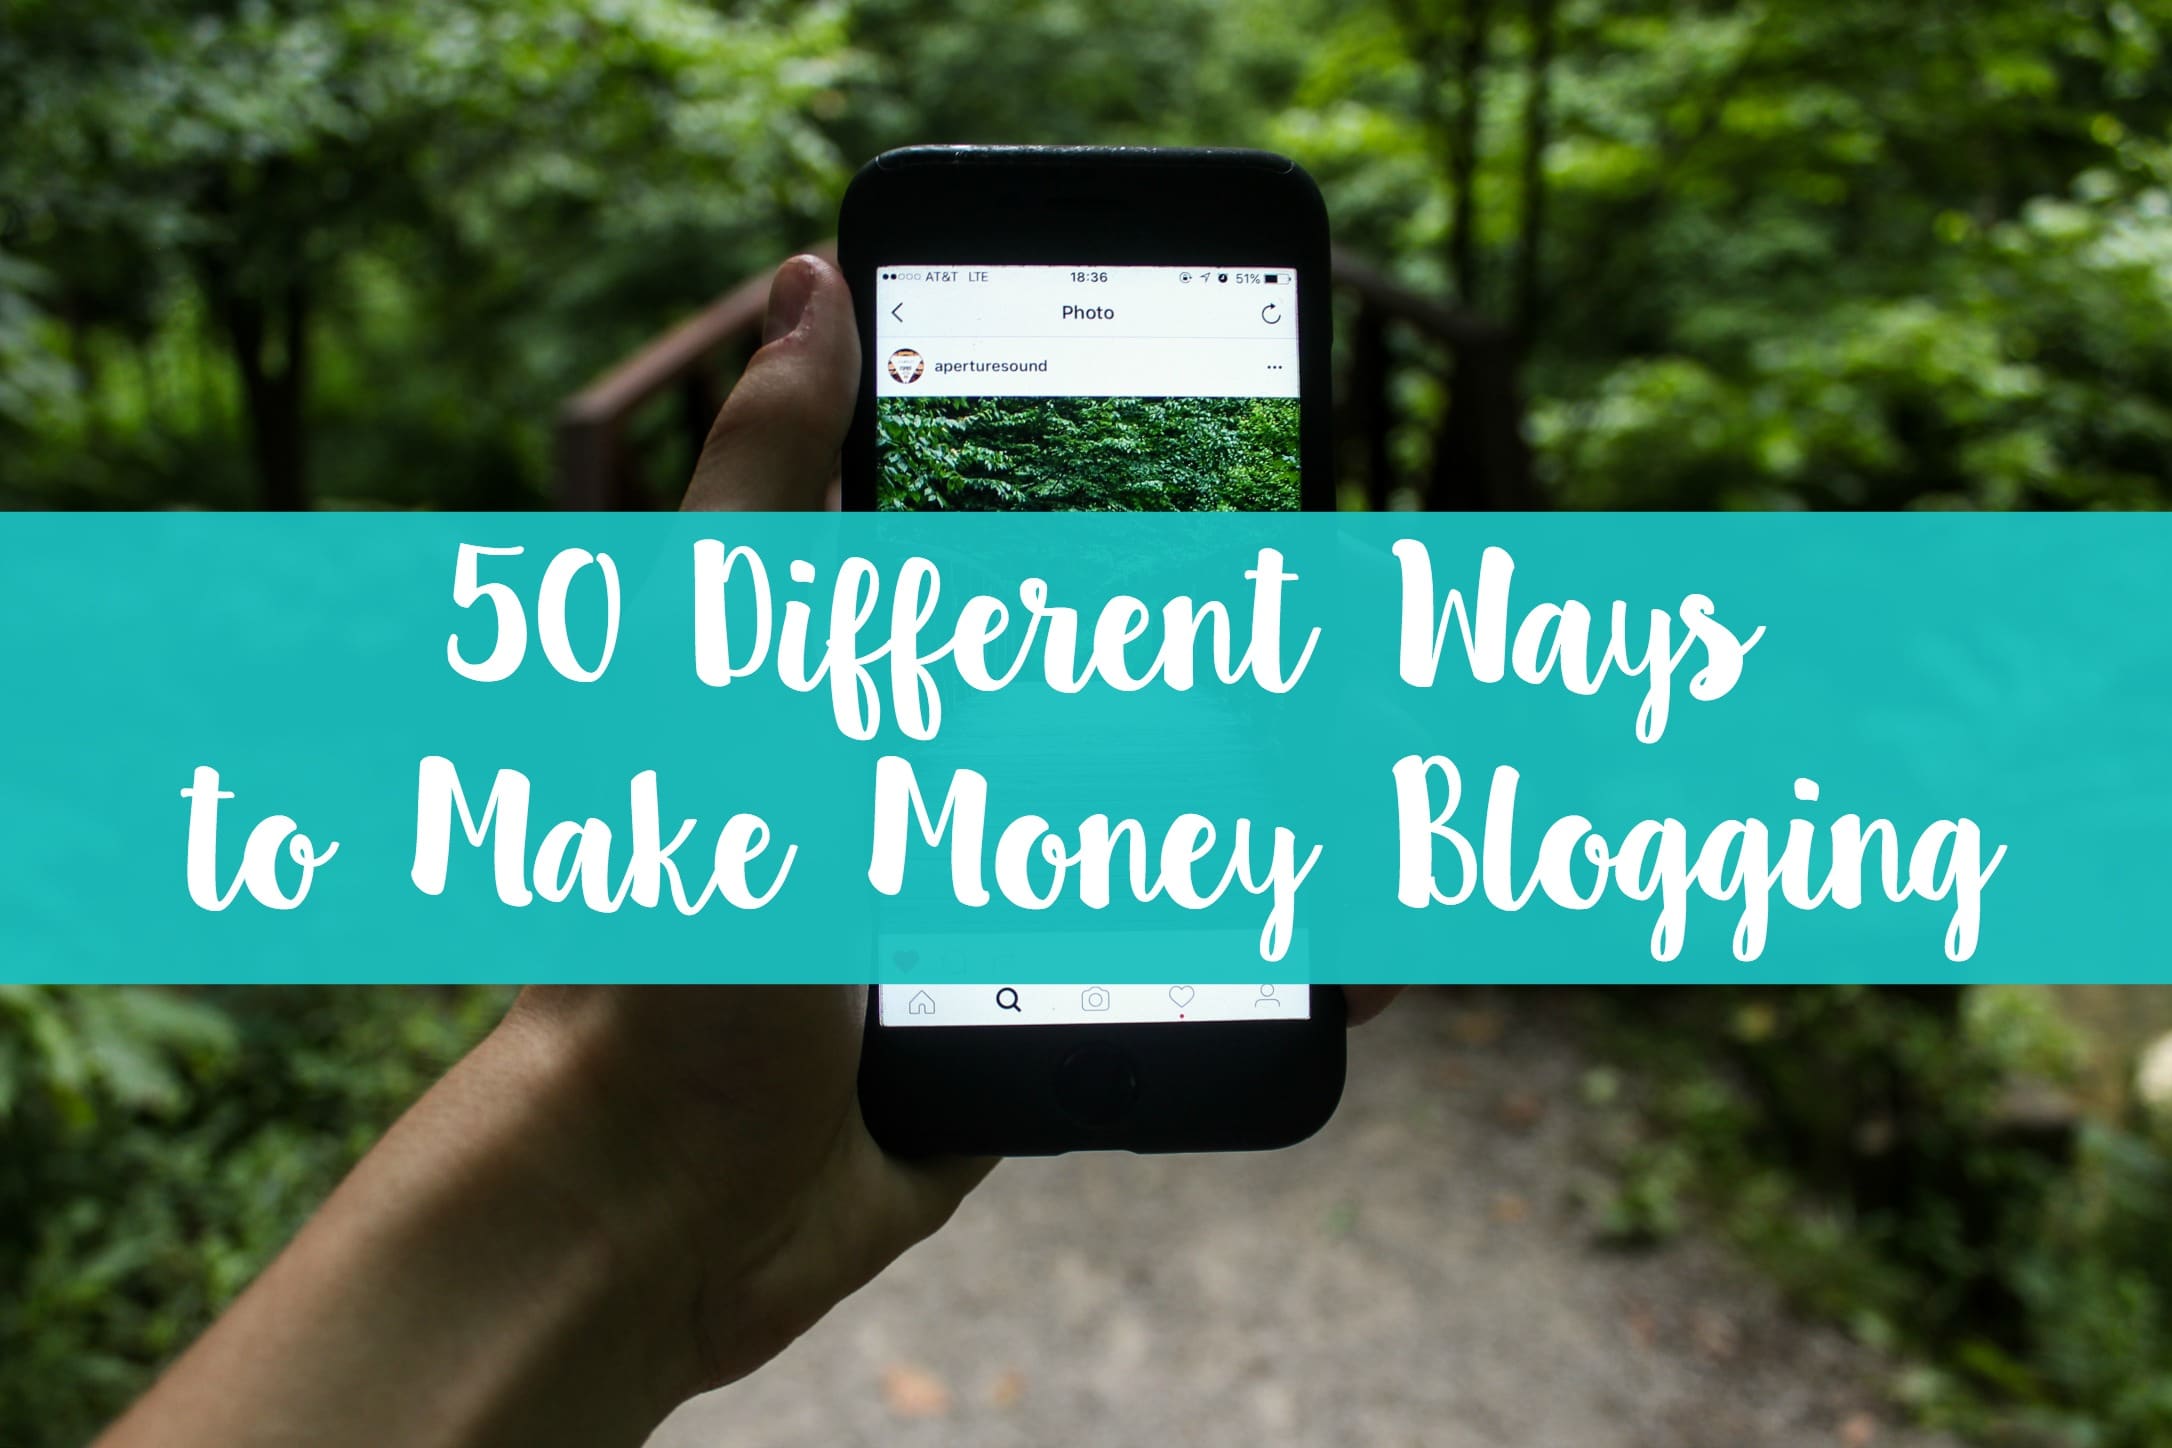 Looking for new ways to make money blogging? Here are over 50 different places to find those opportunities.